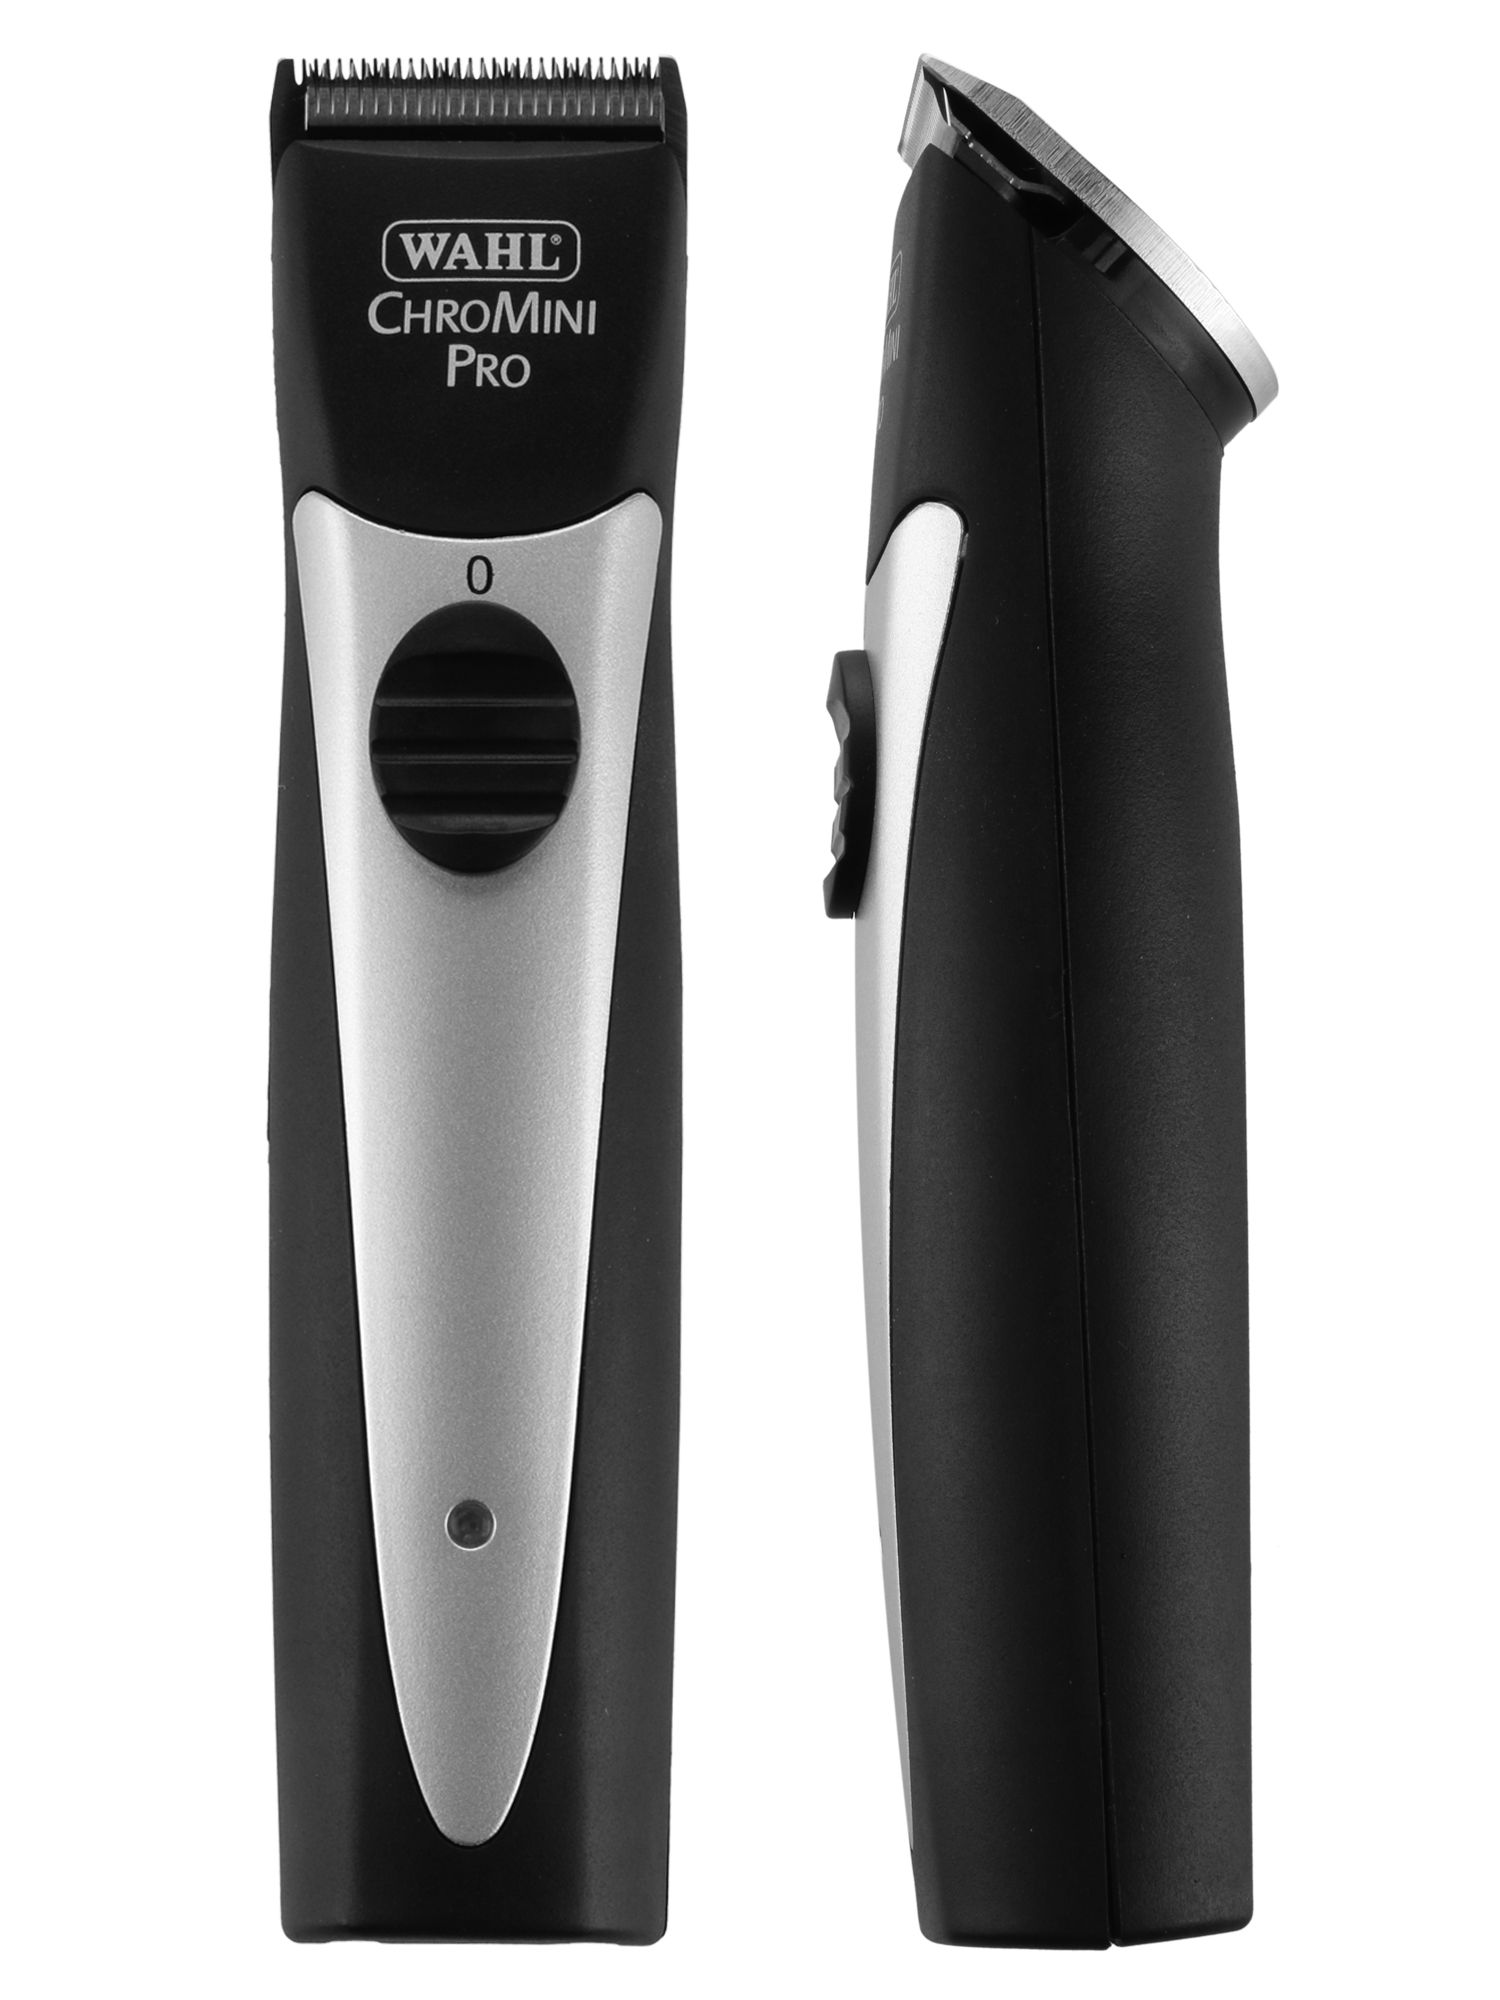 buy wahl clippers